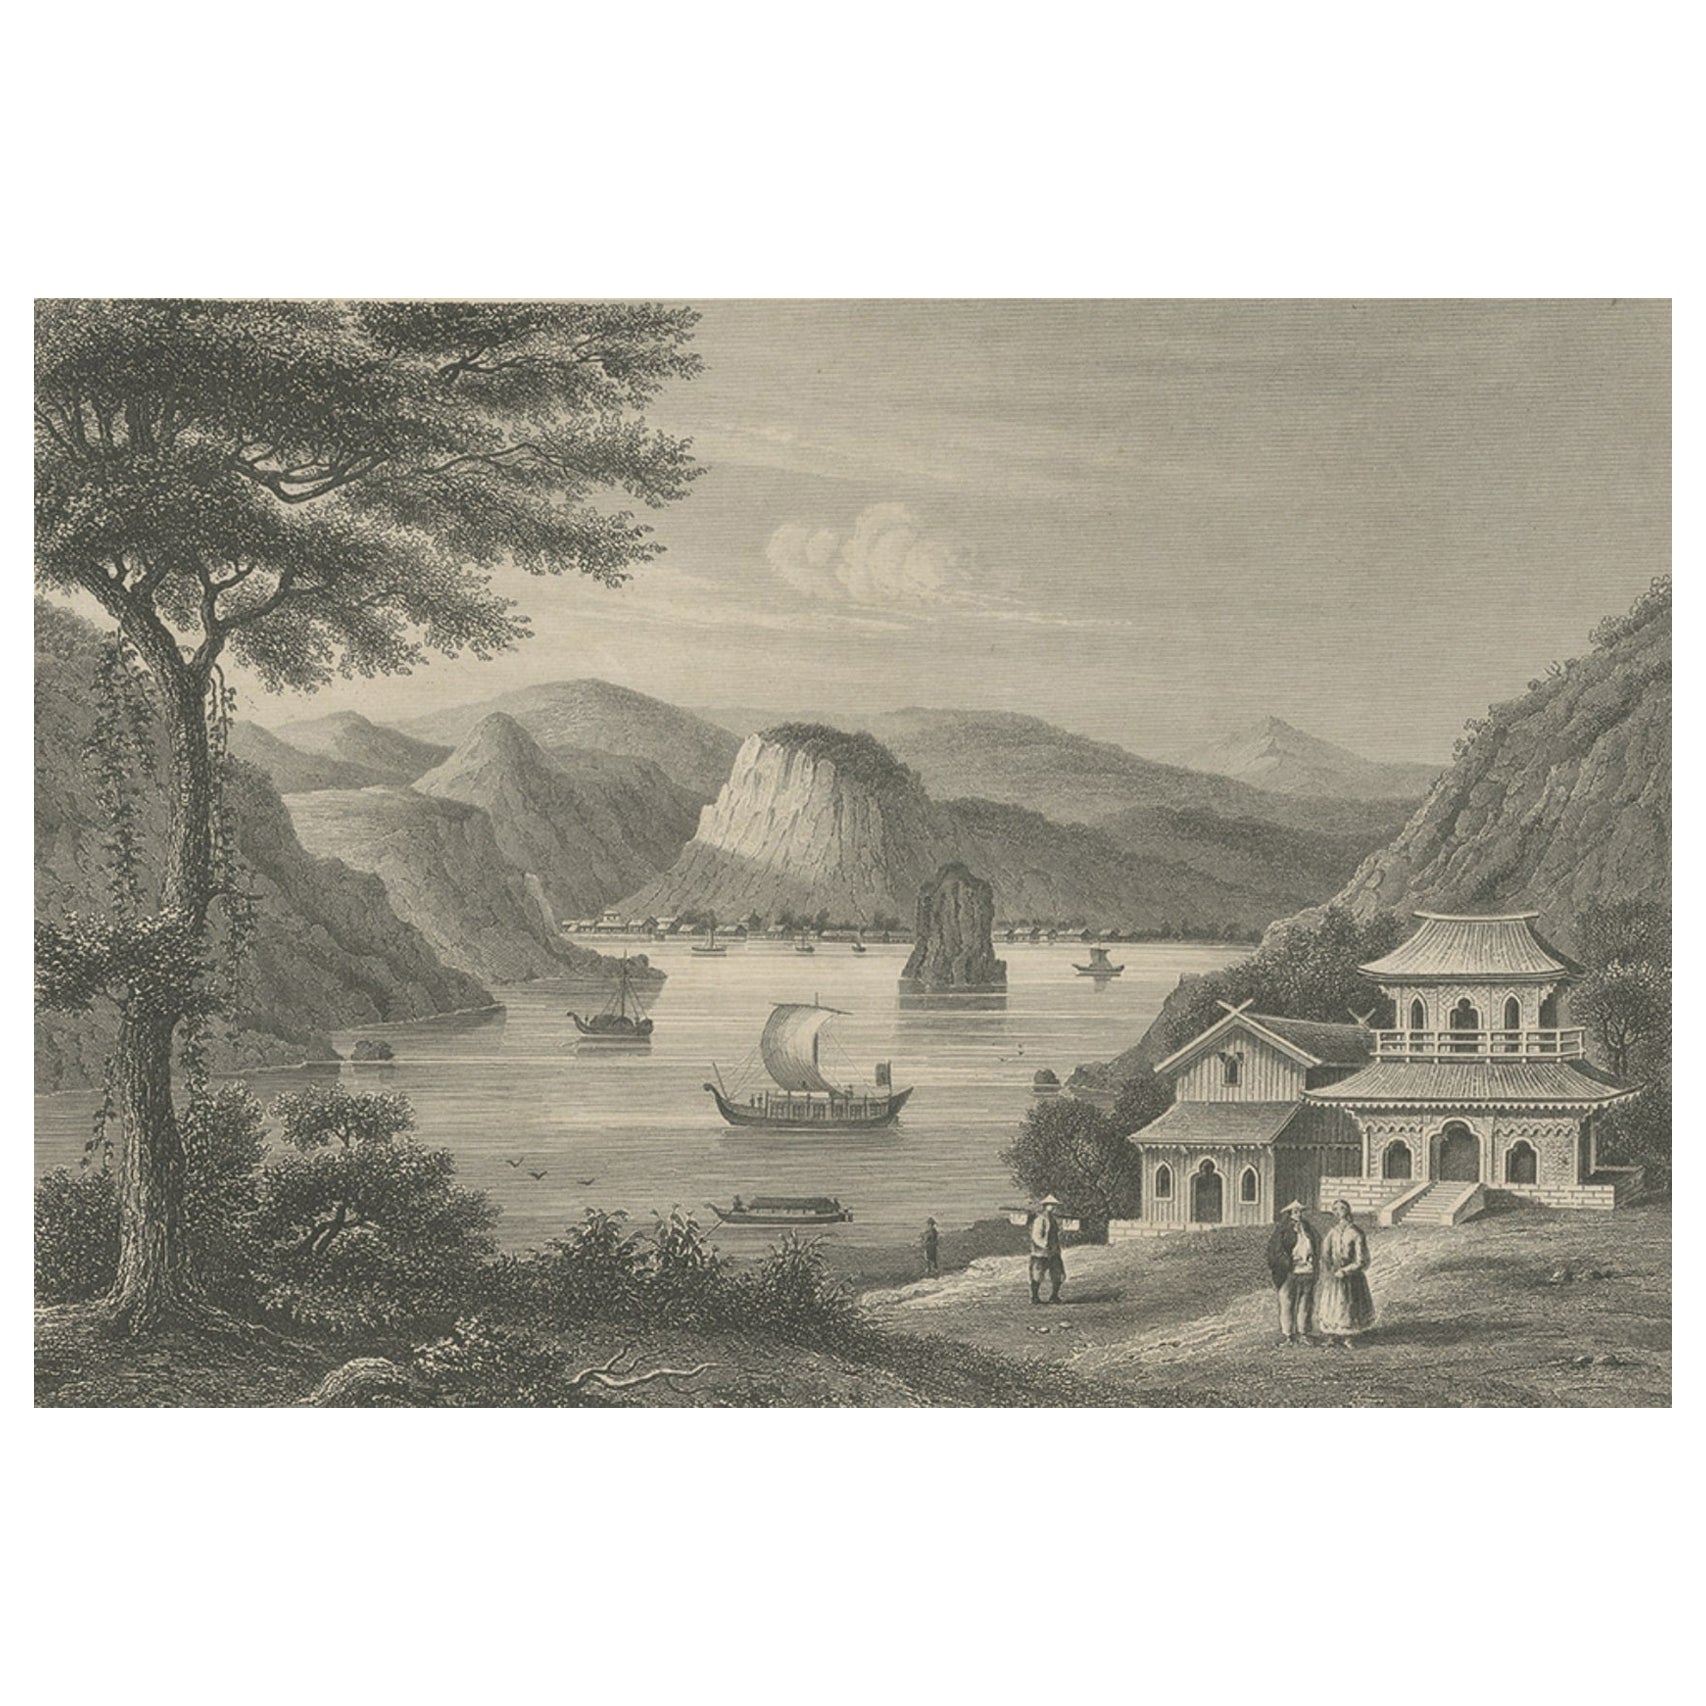 Steel Engraving of Shimoda, a Port Located in Shizuoka Prefecture, Japan, C.1840